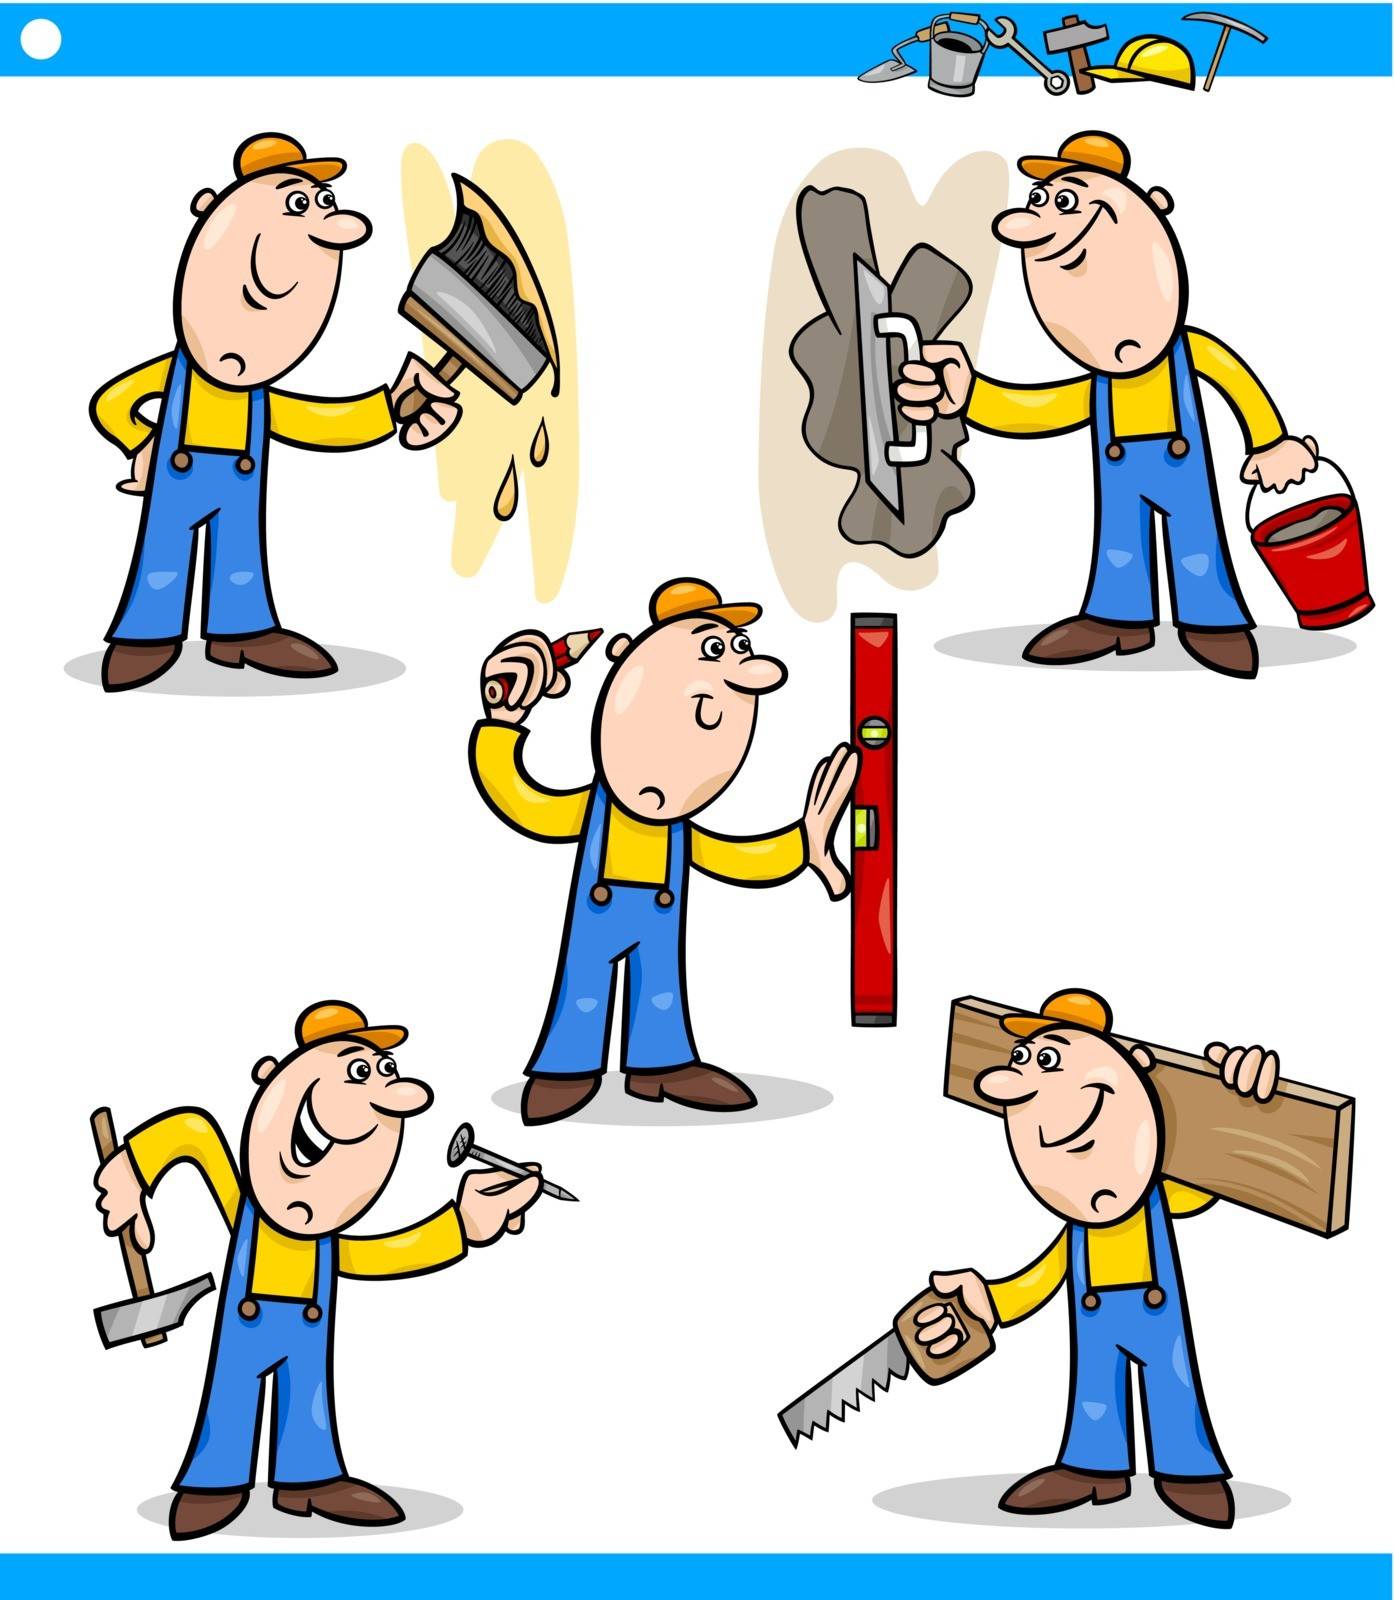 Cartoon Illustration of Funny Manual Workers doing Repairs at Work Characters Set